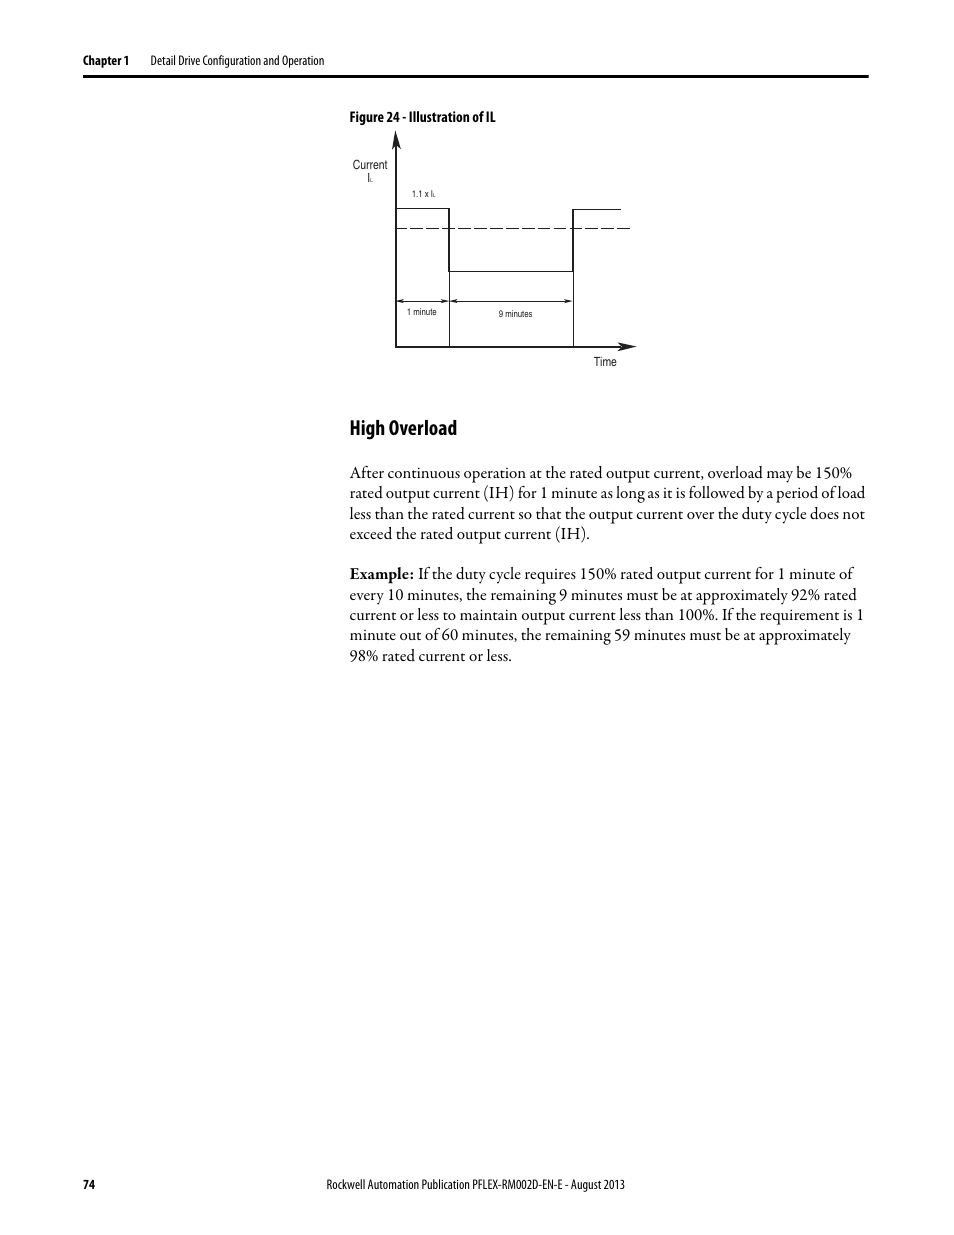 High overload | Rockwell Automation 20D PowerFlex 700S with Phase I Control Reference Manual User Manual | Page 74 / 190